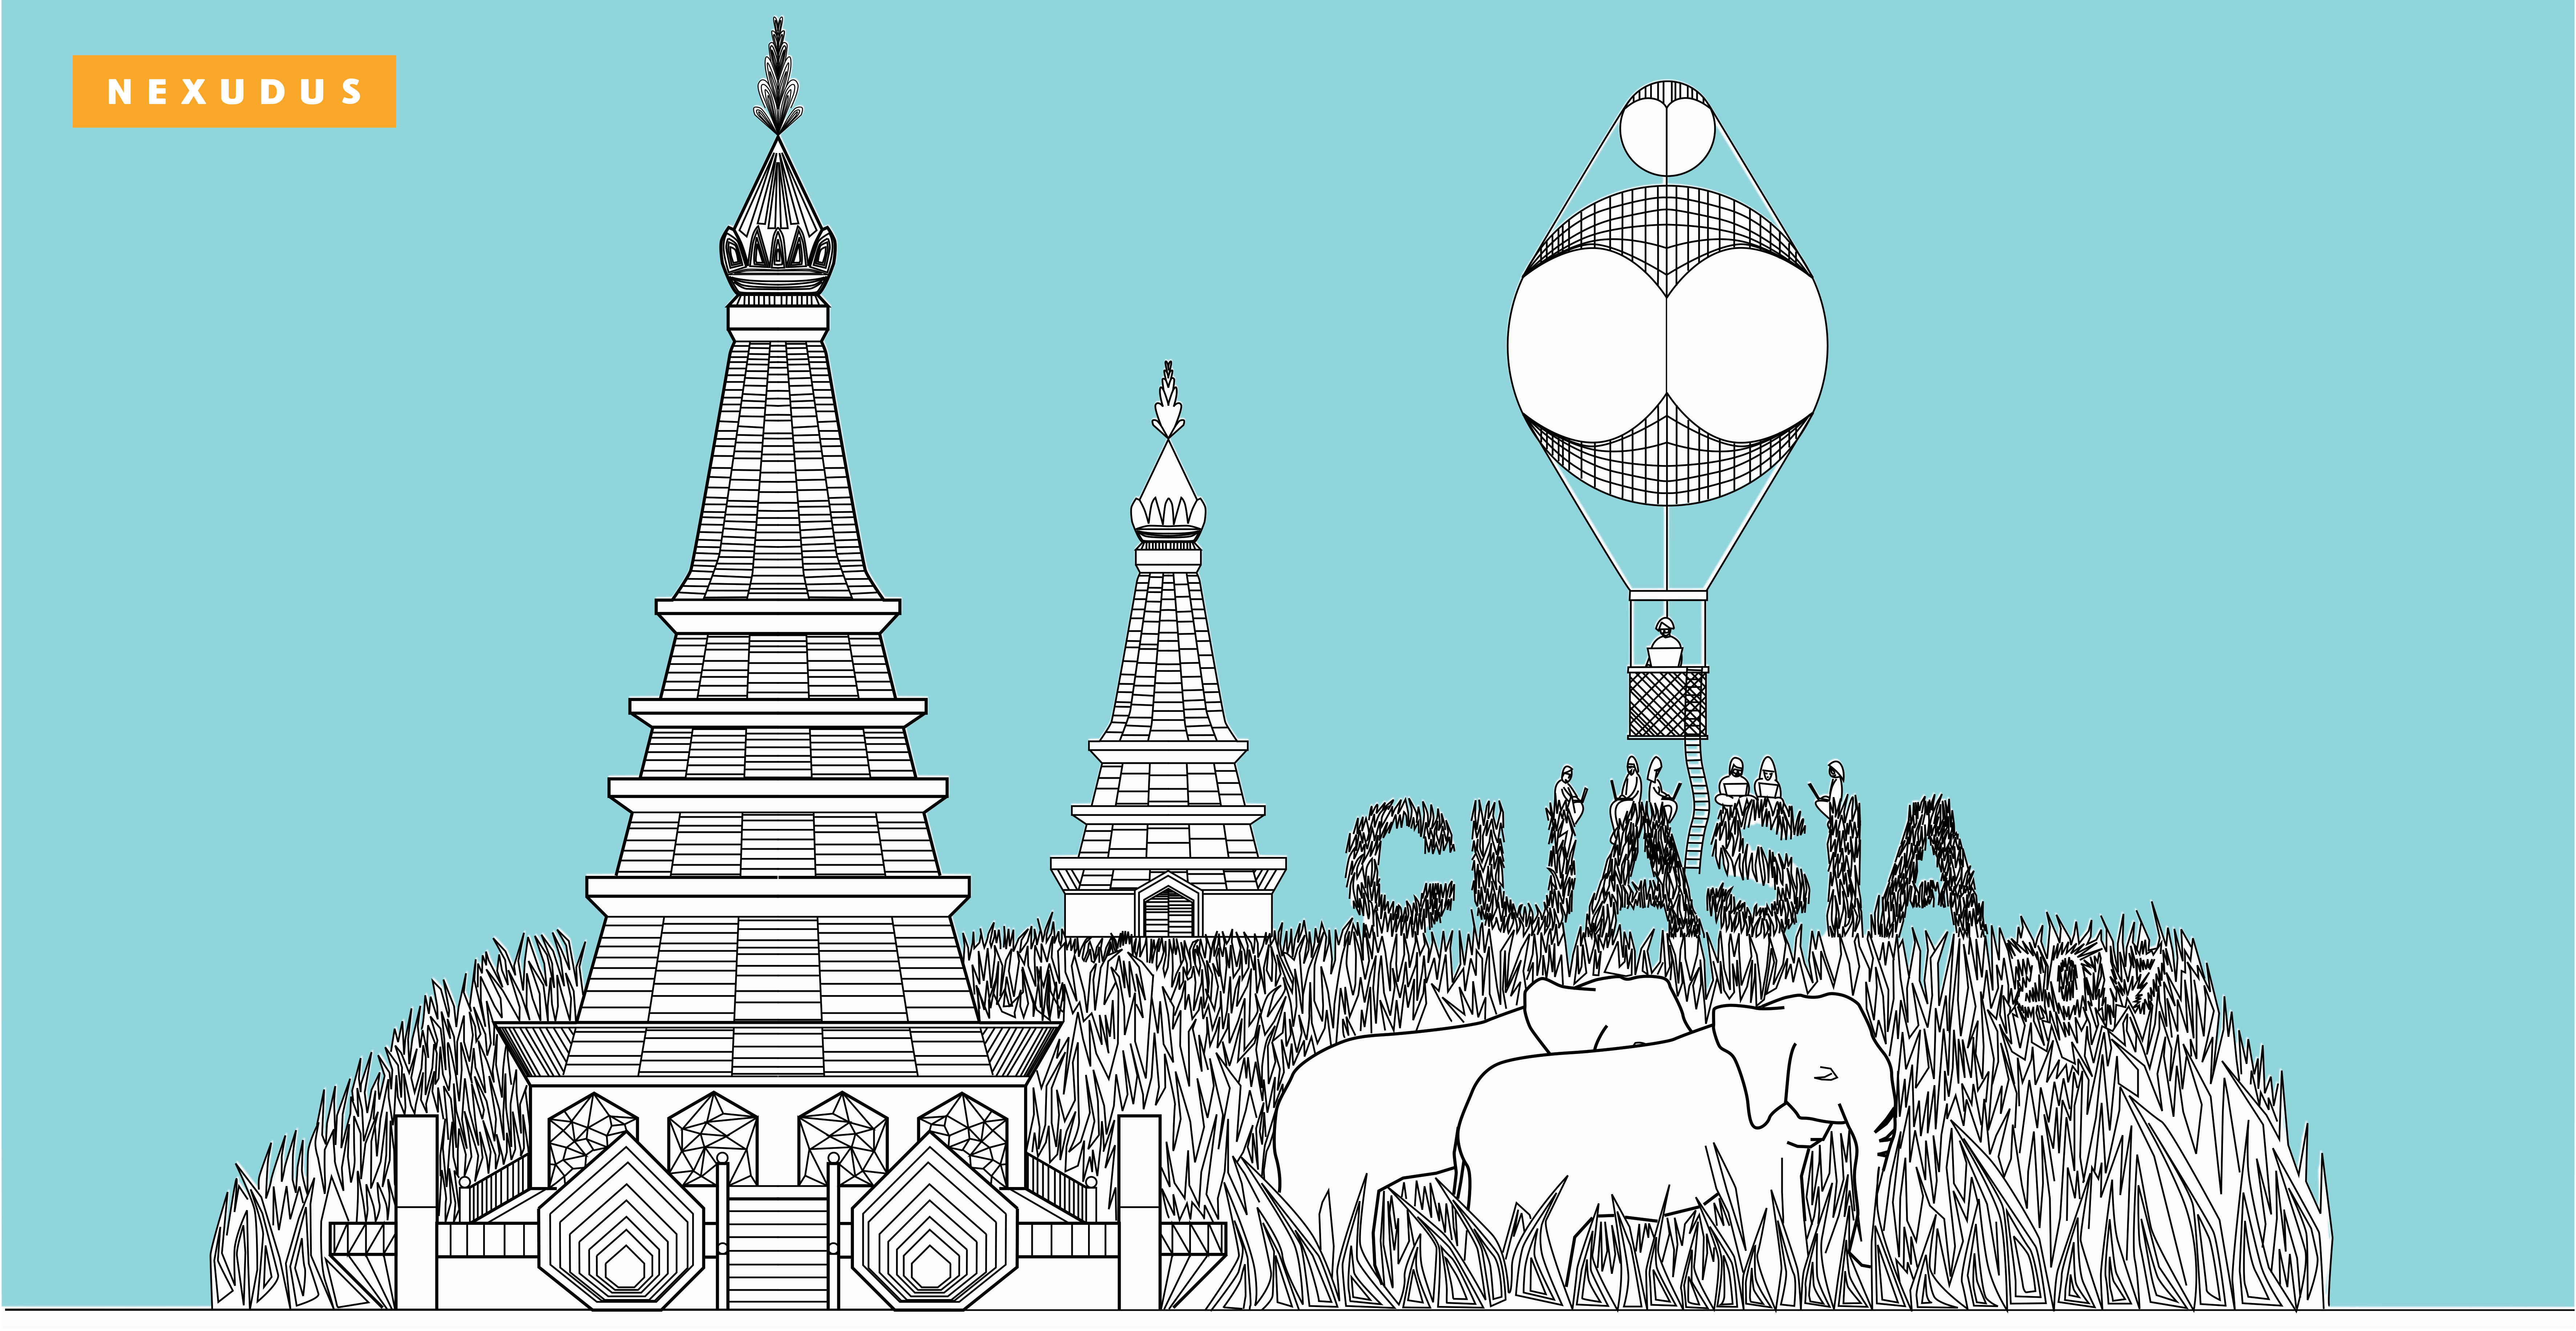 CUASIA 2017 / What to expect from Chiang Mai this week?